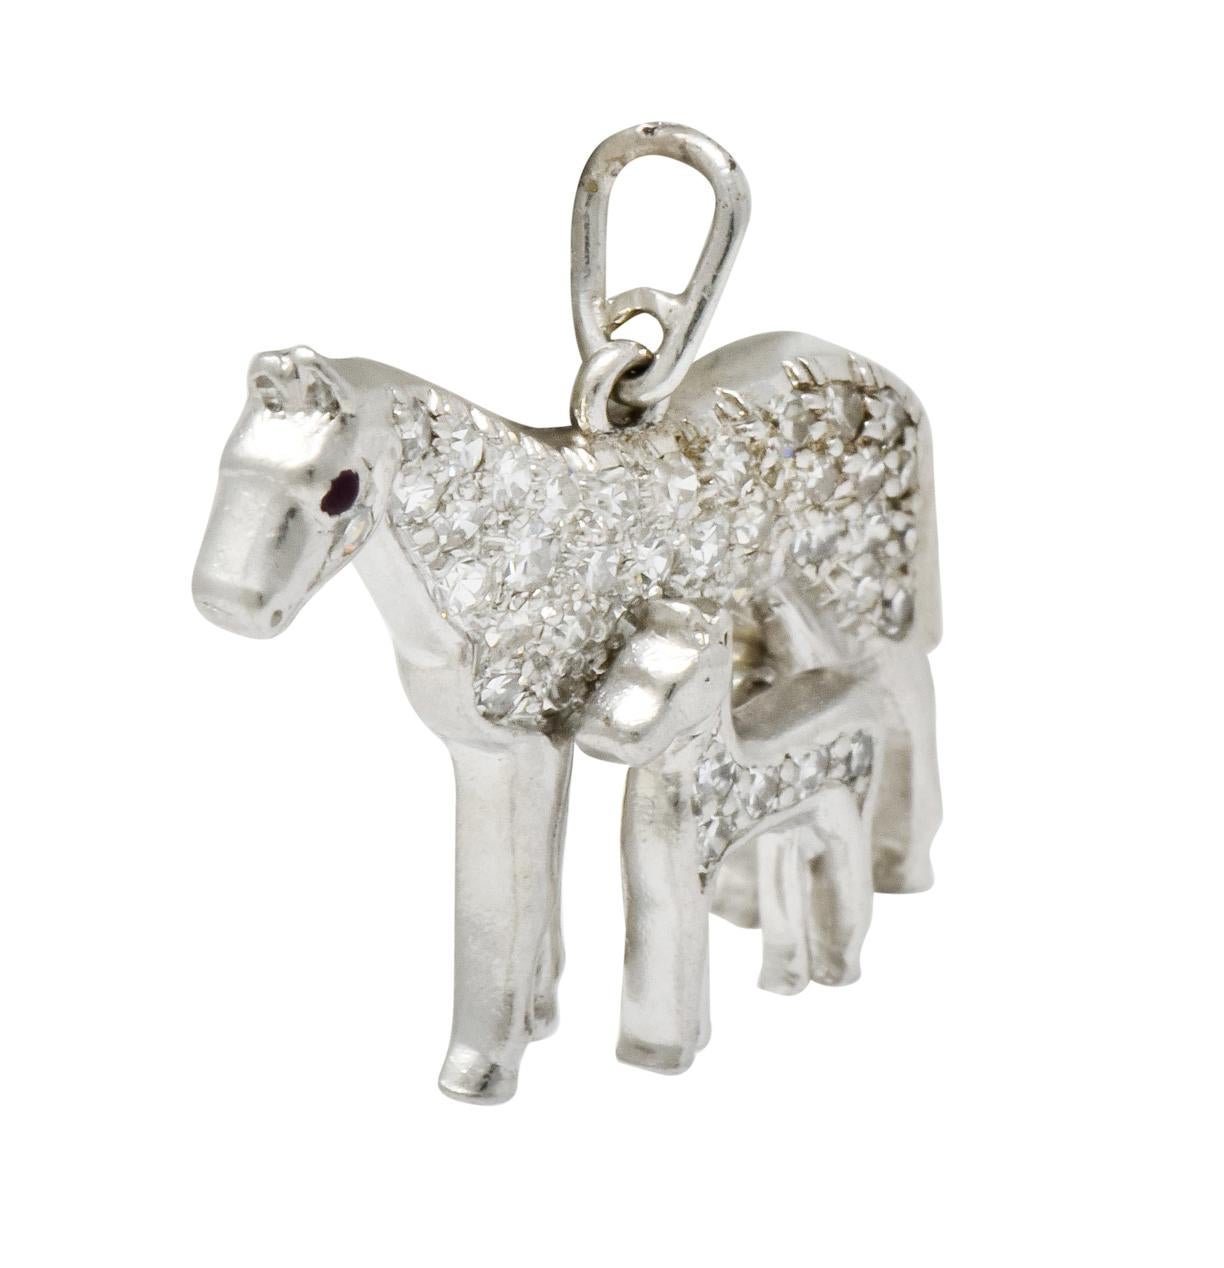 Charm is designed as a mother horse standing side-by-side with her foal

Each horse is pavé set throughout with single cut diamonds weighing approximately 0.45 carat total, eye-clean and white

Completed by round ruby cabochon eye accent and